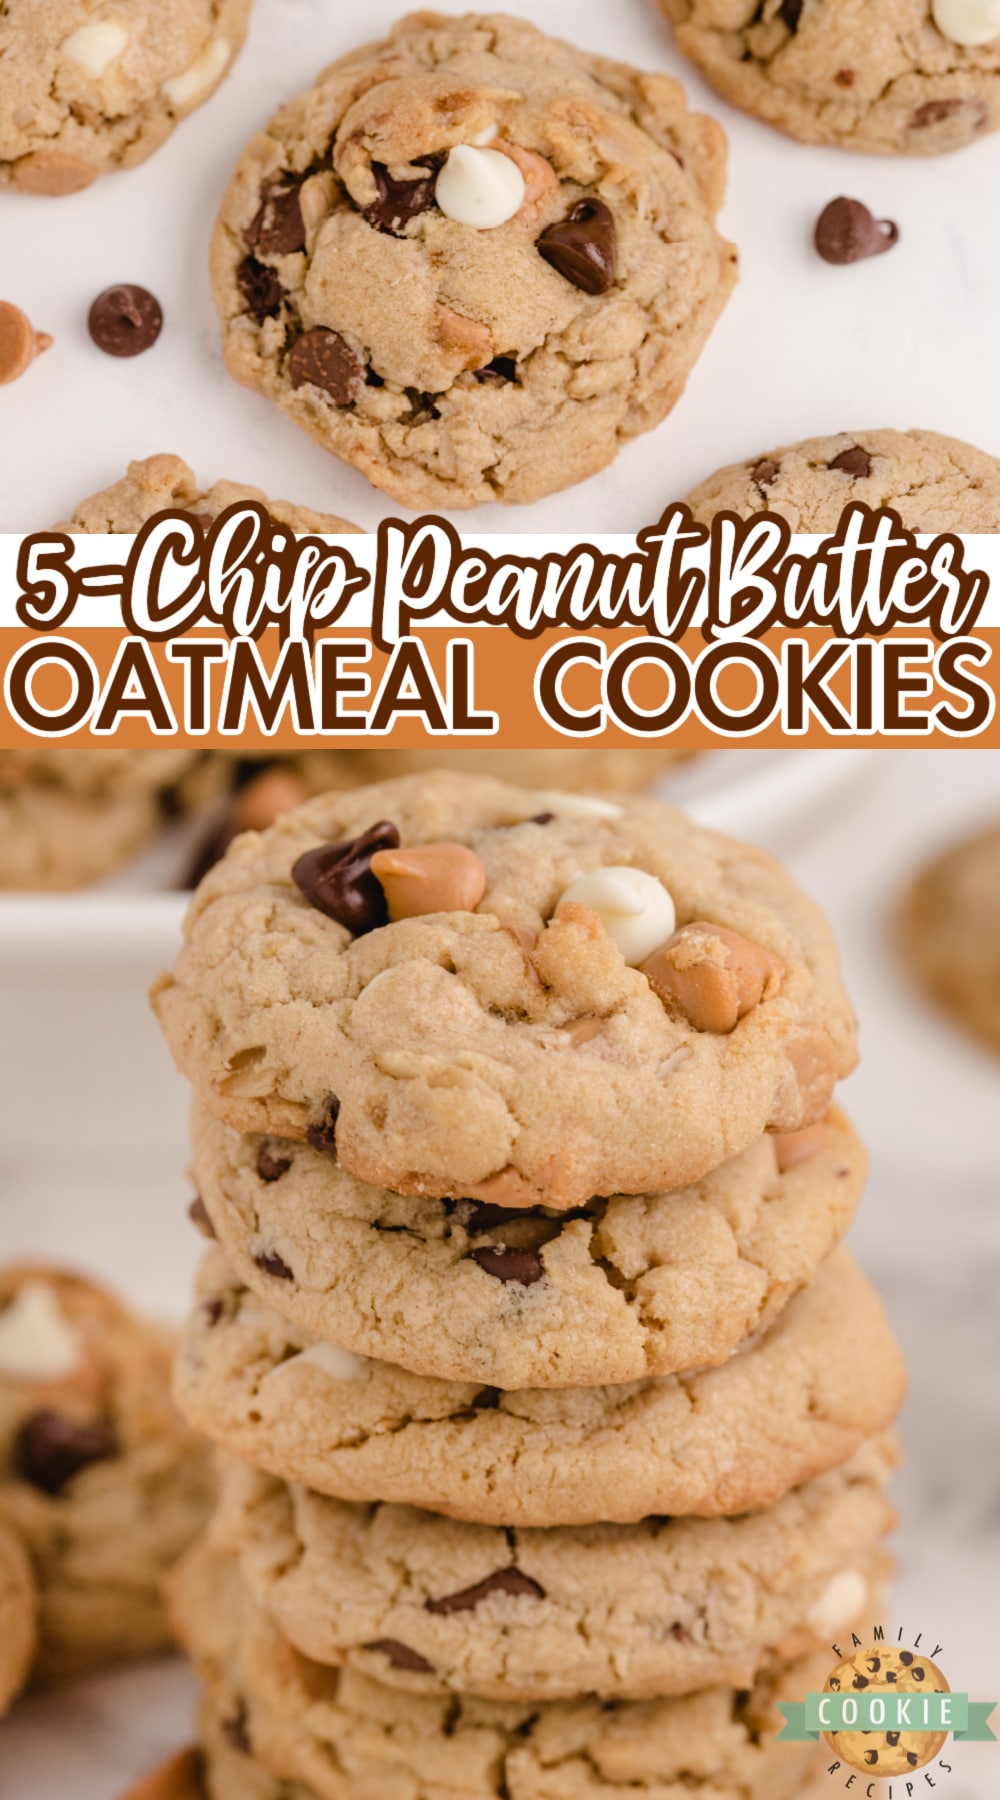 Five Chip Peanut Butter Oatmeal Cookies are soft, chewy and filled with five different kinds of baking chips! Milk chocolate, semisweet chocolate, peanut butter, vanilla and butterscotch chips make these oatmeal peanut butter cookies absolutely amazing!